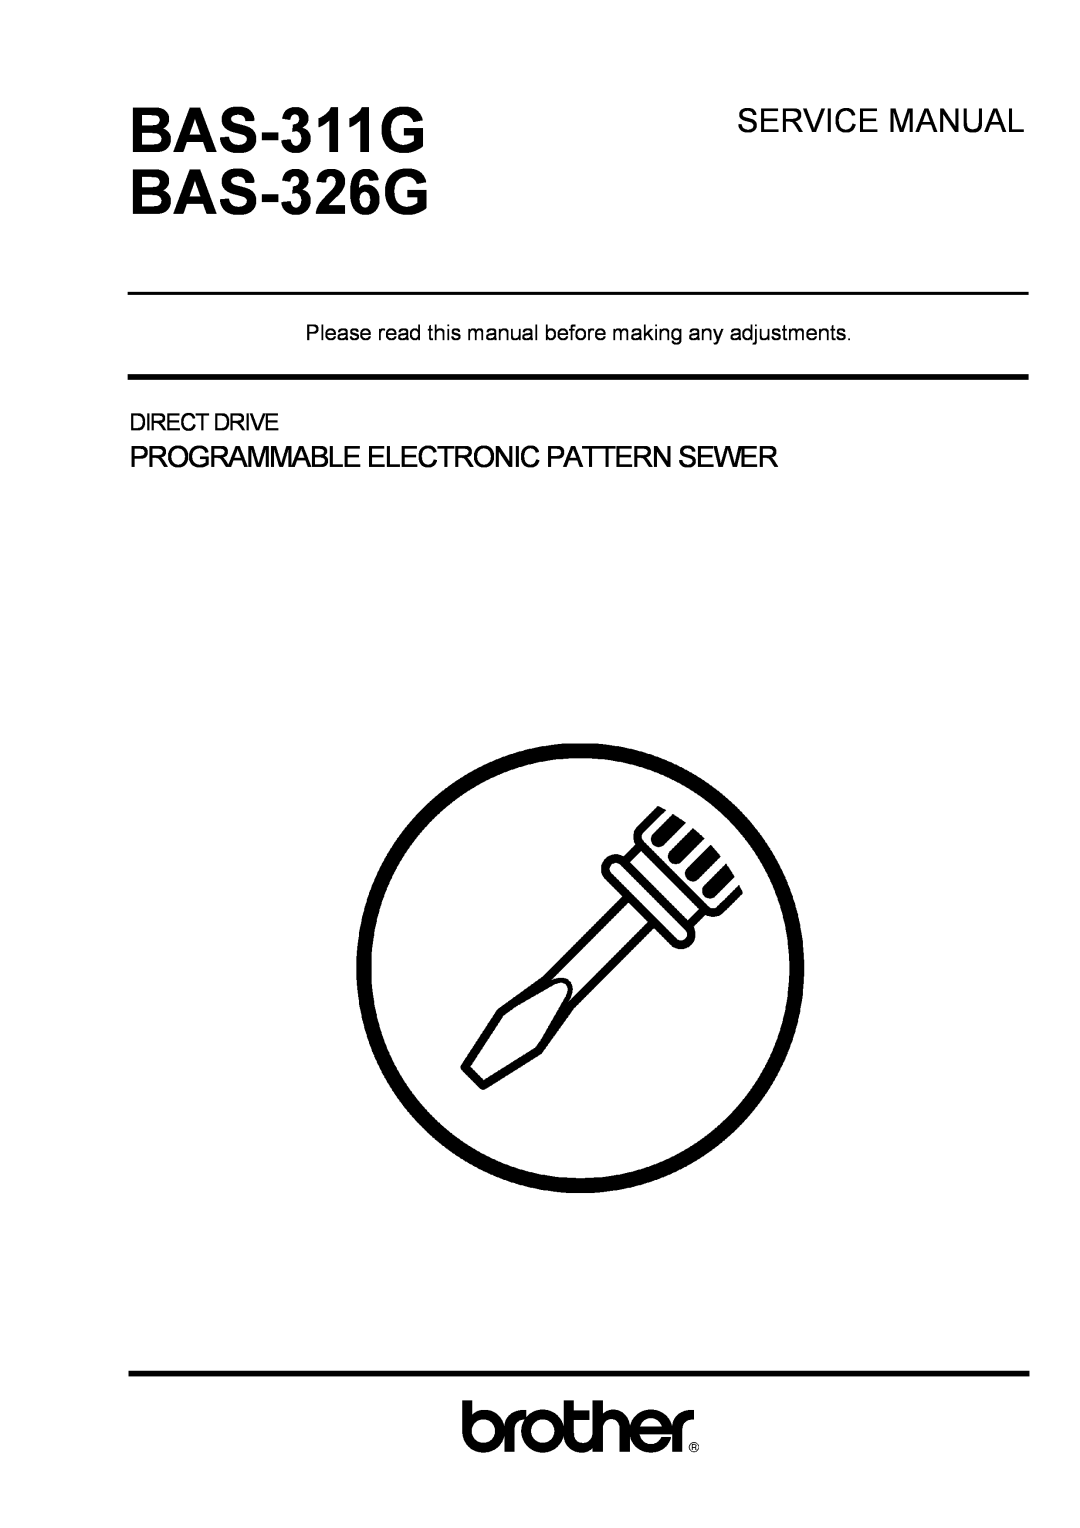 Brother service manual BAS-311G BAS-326G, Service Manual, Programmable Electronic Pattern Sewer, Direct Drive 